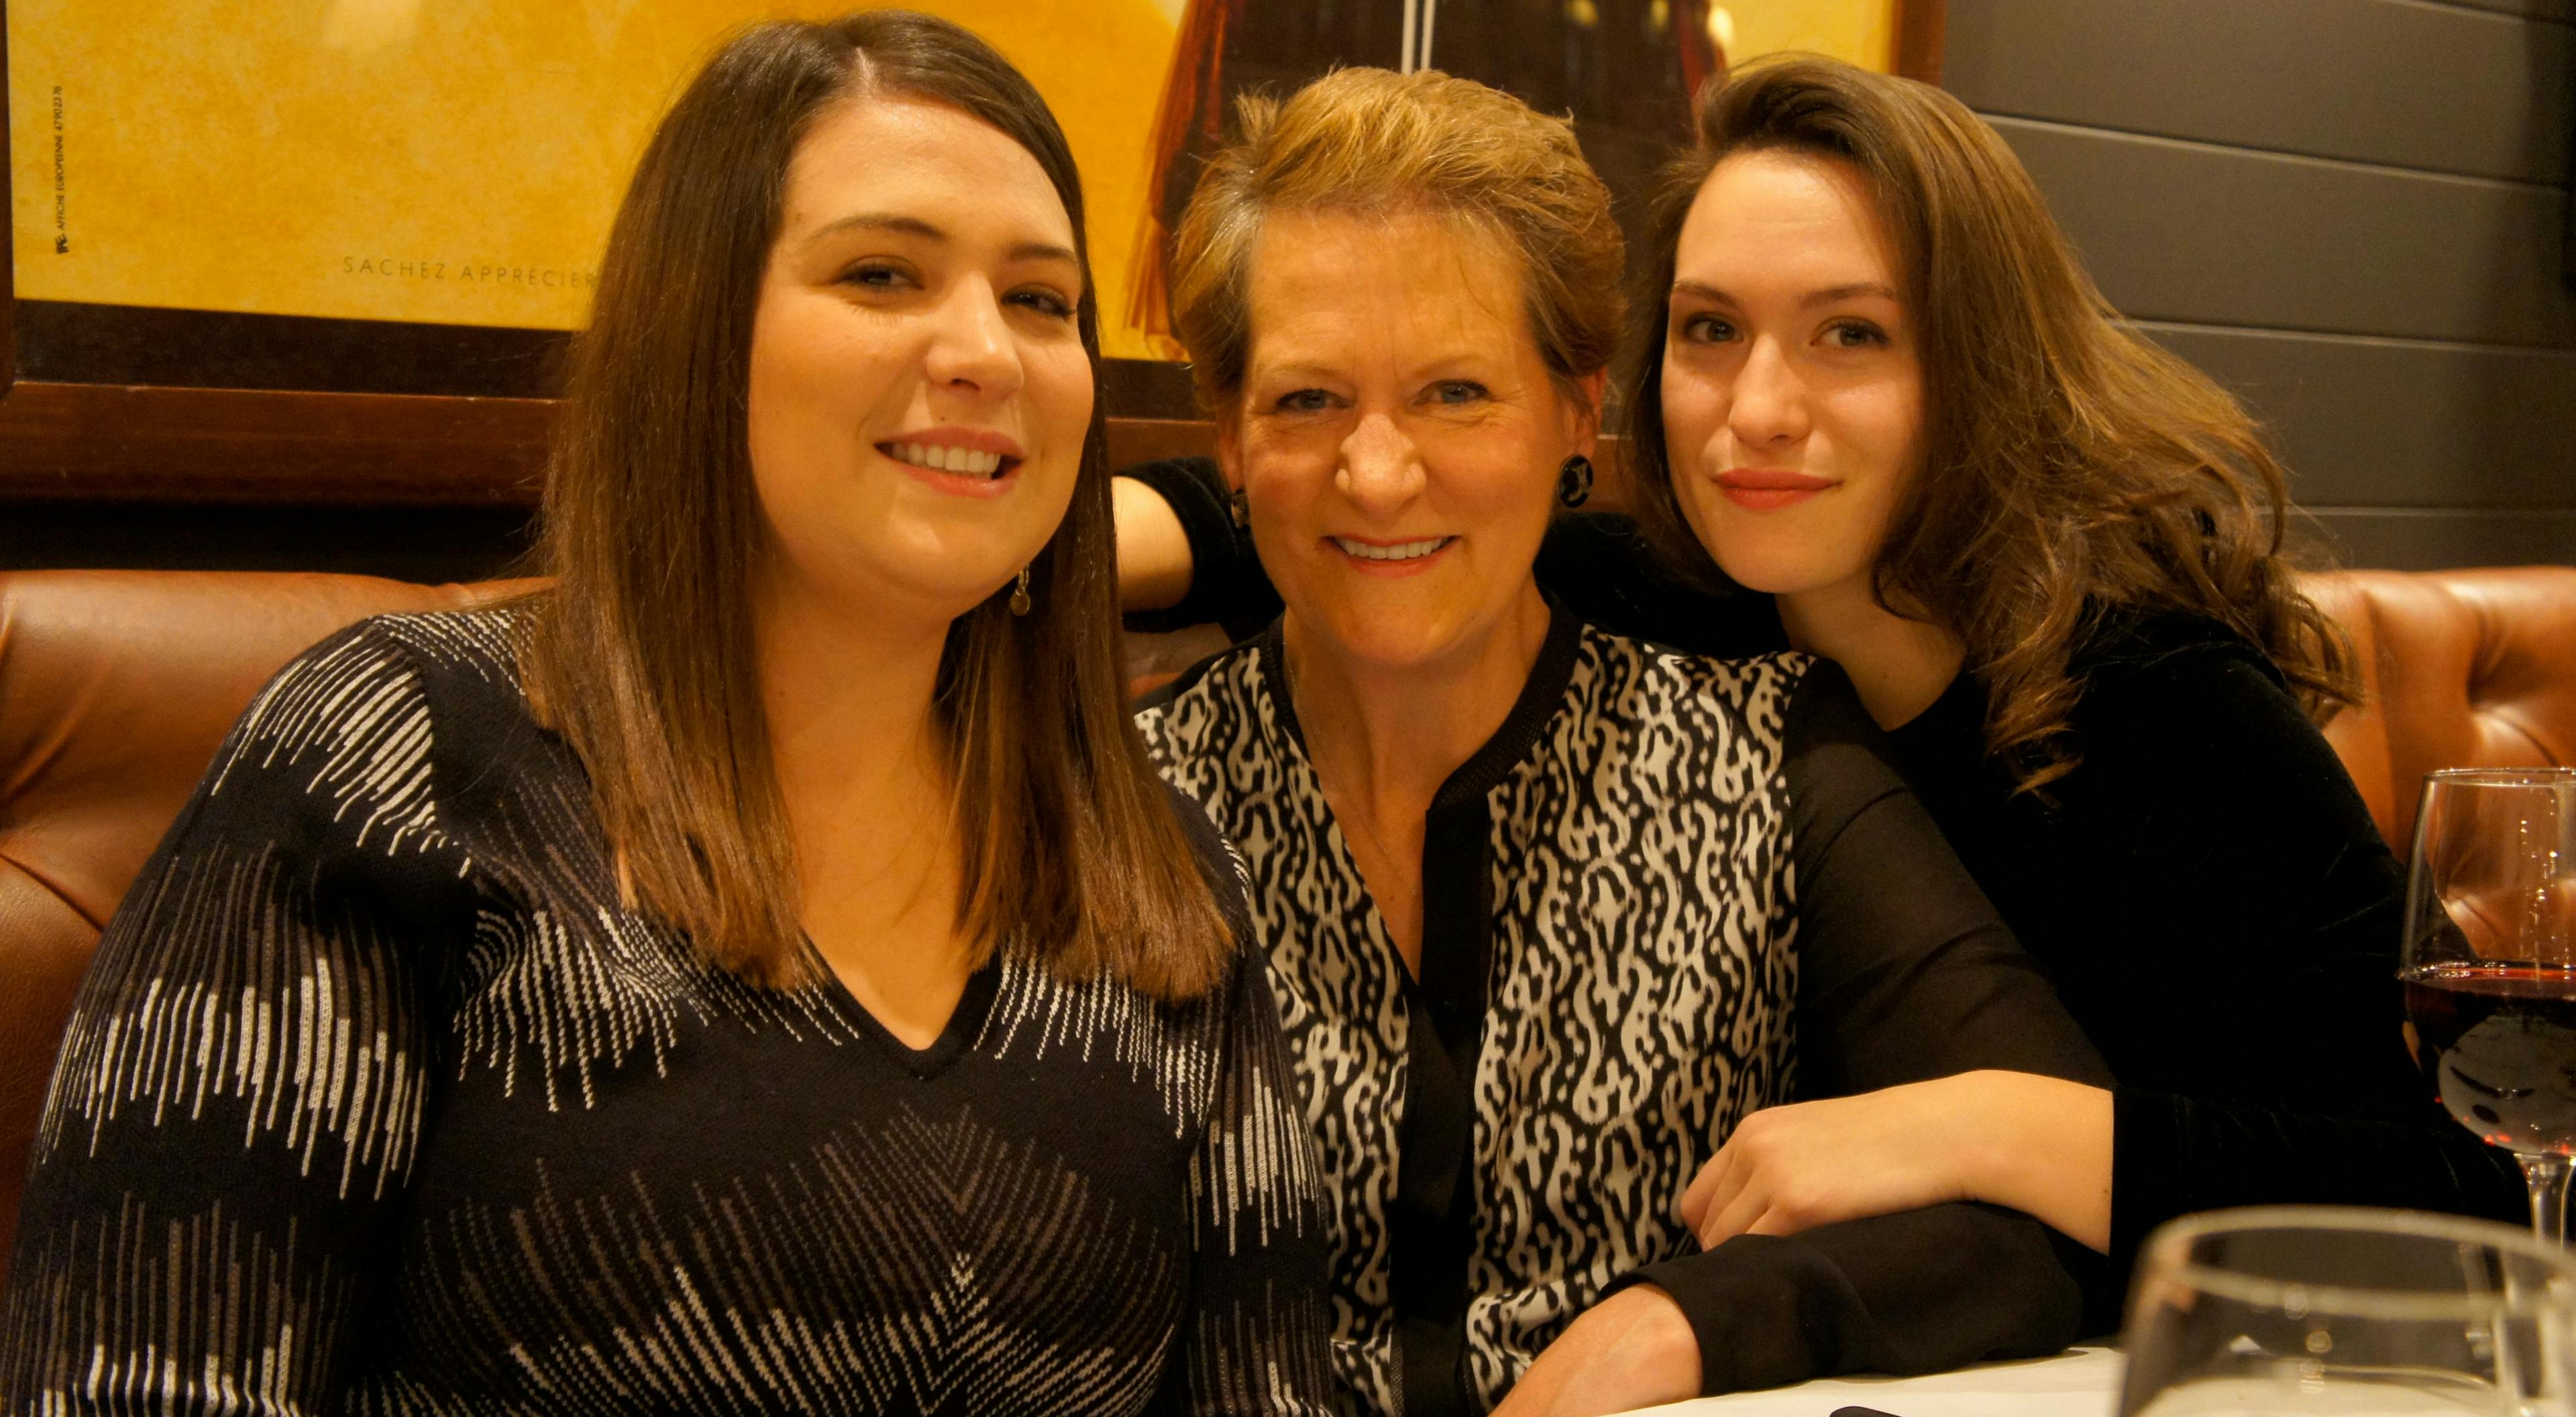 Carolyn with her daughters, Sydney and MacKenzie, in 2014, the year she went flat.